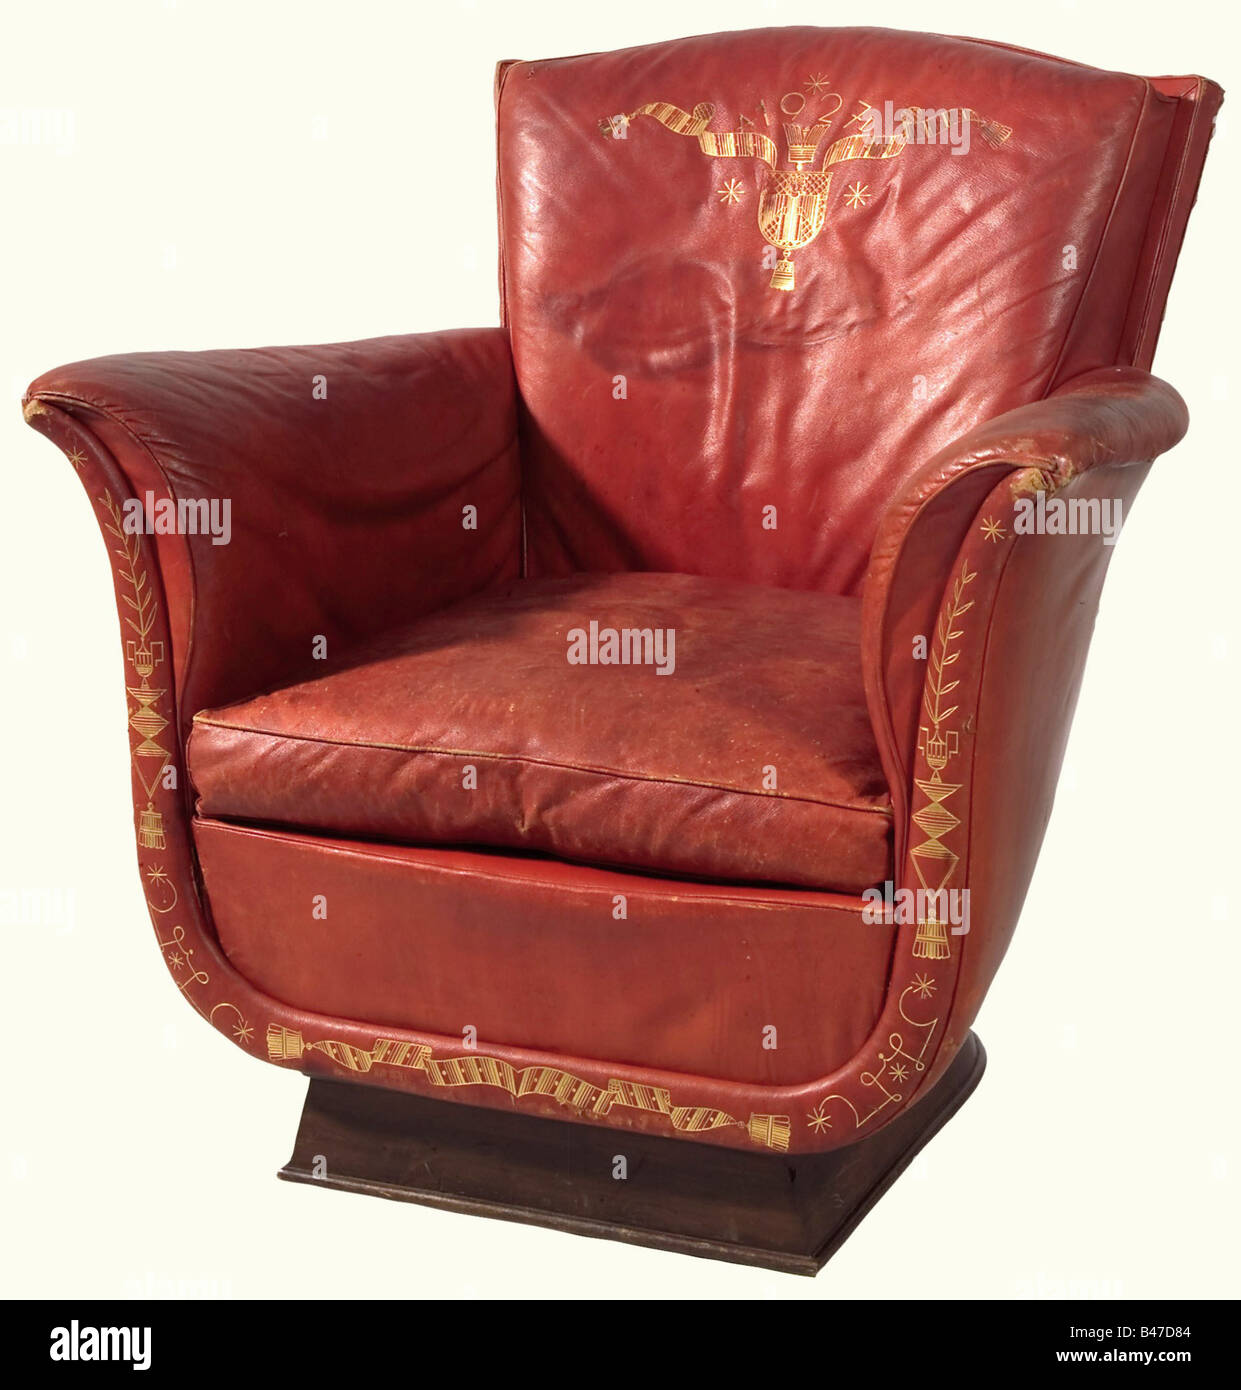 Pope Pius XII - a presentation arm chair from Prince Alfons of Bavaria, for the 1926/27 New Year to HE Msgr. Dr. Eugen Pacelli, Archbishop of Sardes and Papal Nuncio in Berlin. Red Morocco leather stamped in gold. The Munich coat of arms is on the back with a waving scrol historic, historical, 1920s, 20th century, fine arts, art, art object, art objects, artful, precious, collectible, collector's item, collectibles, collector's items, rarity, rarities, Stock Photo